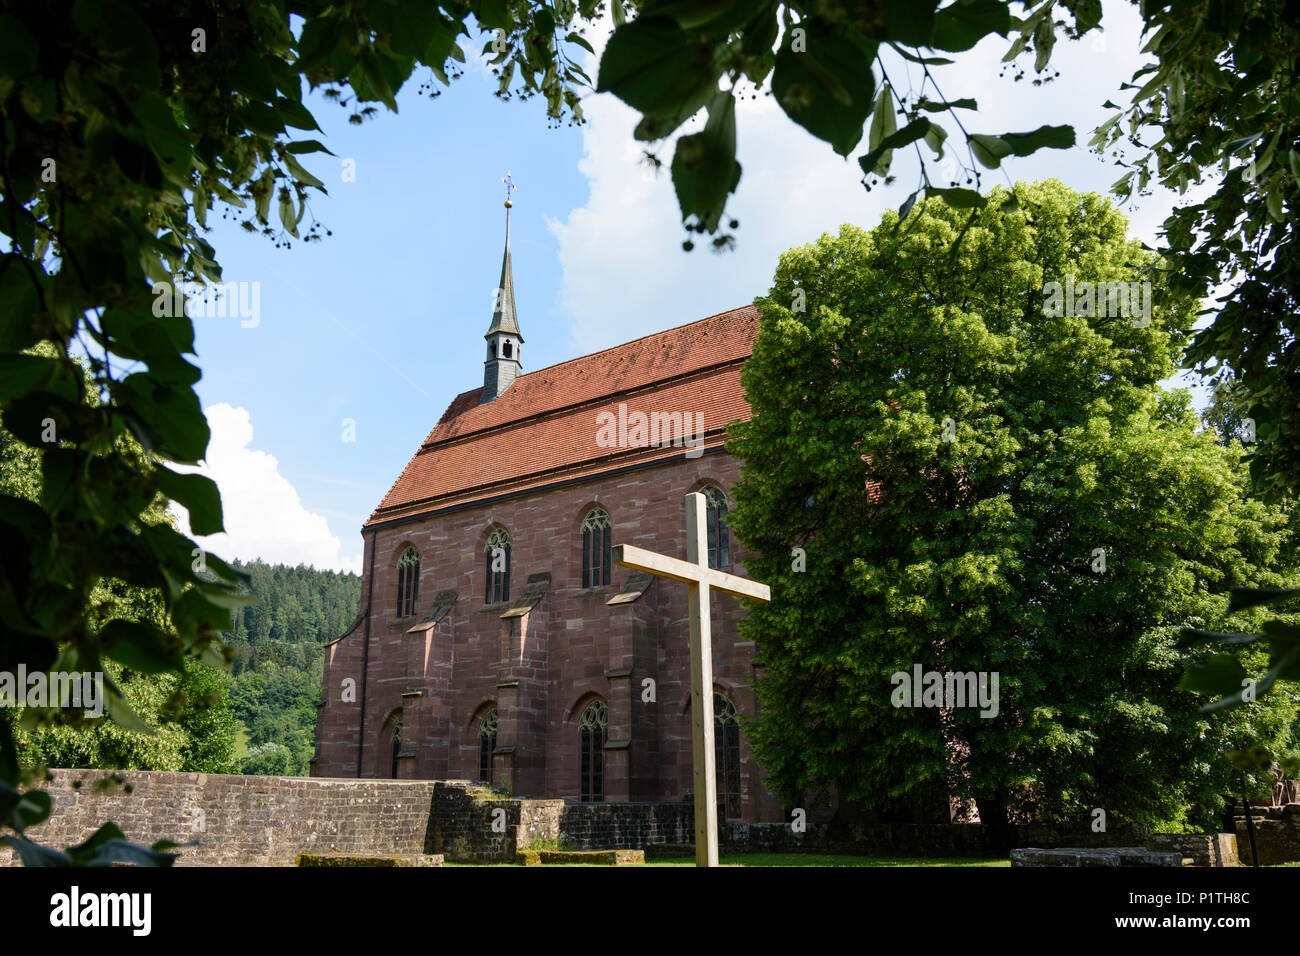 Calw: district Hirsau: ruins of Monastery of St. Peter and St. Paul, chapel Marienkapelle in Germany, Baden-Württemberg, Schwarzwald, Black Forest Stock Photo